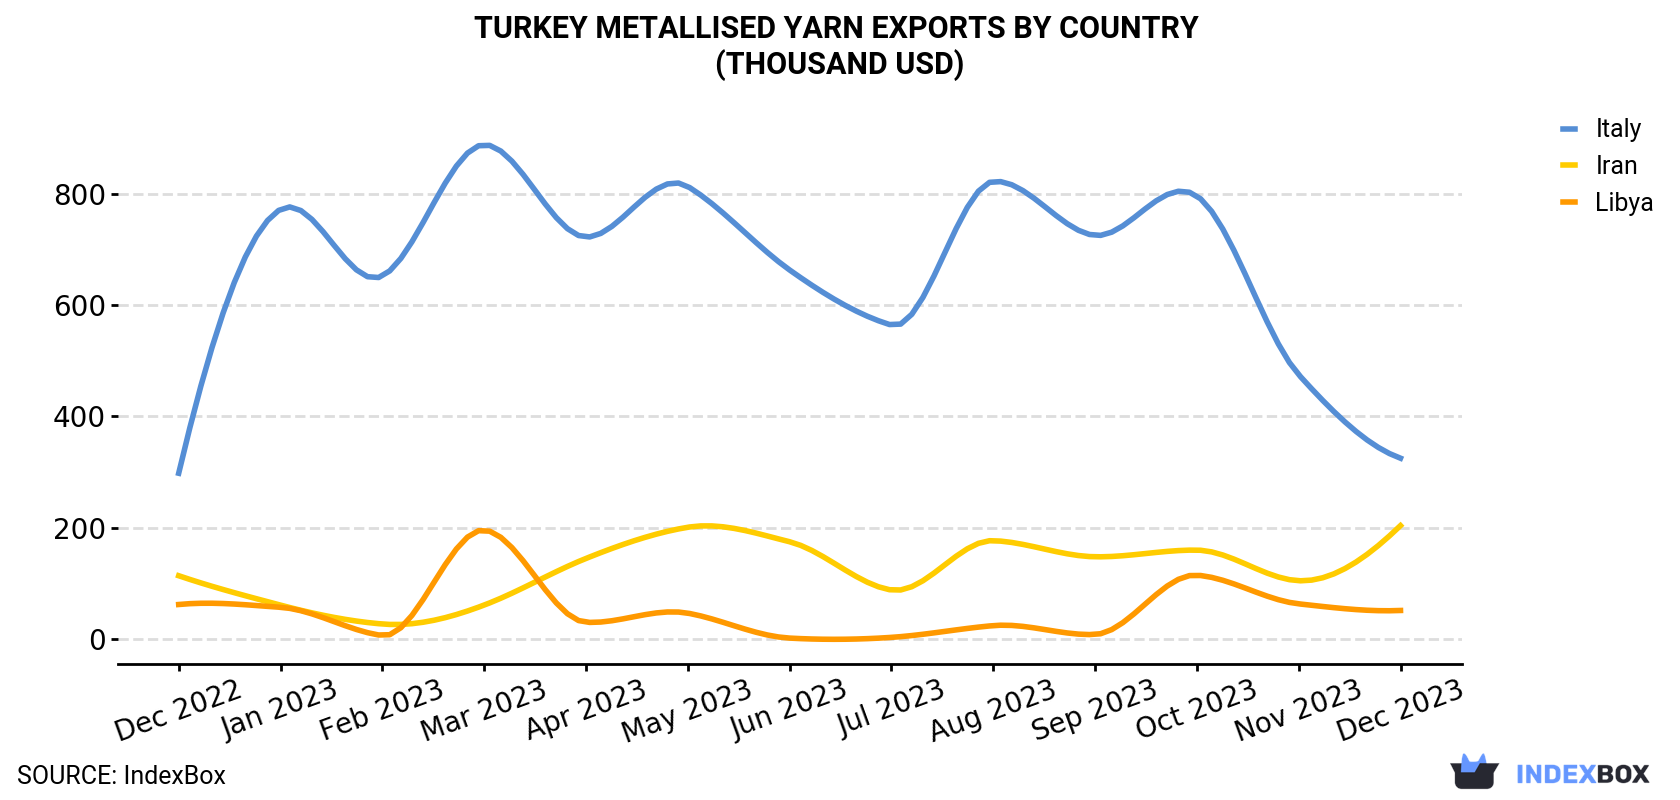 Turkey Metallised Yarn Exports By Country (Thousand USD)